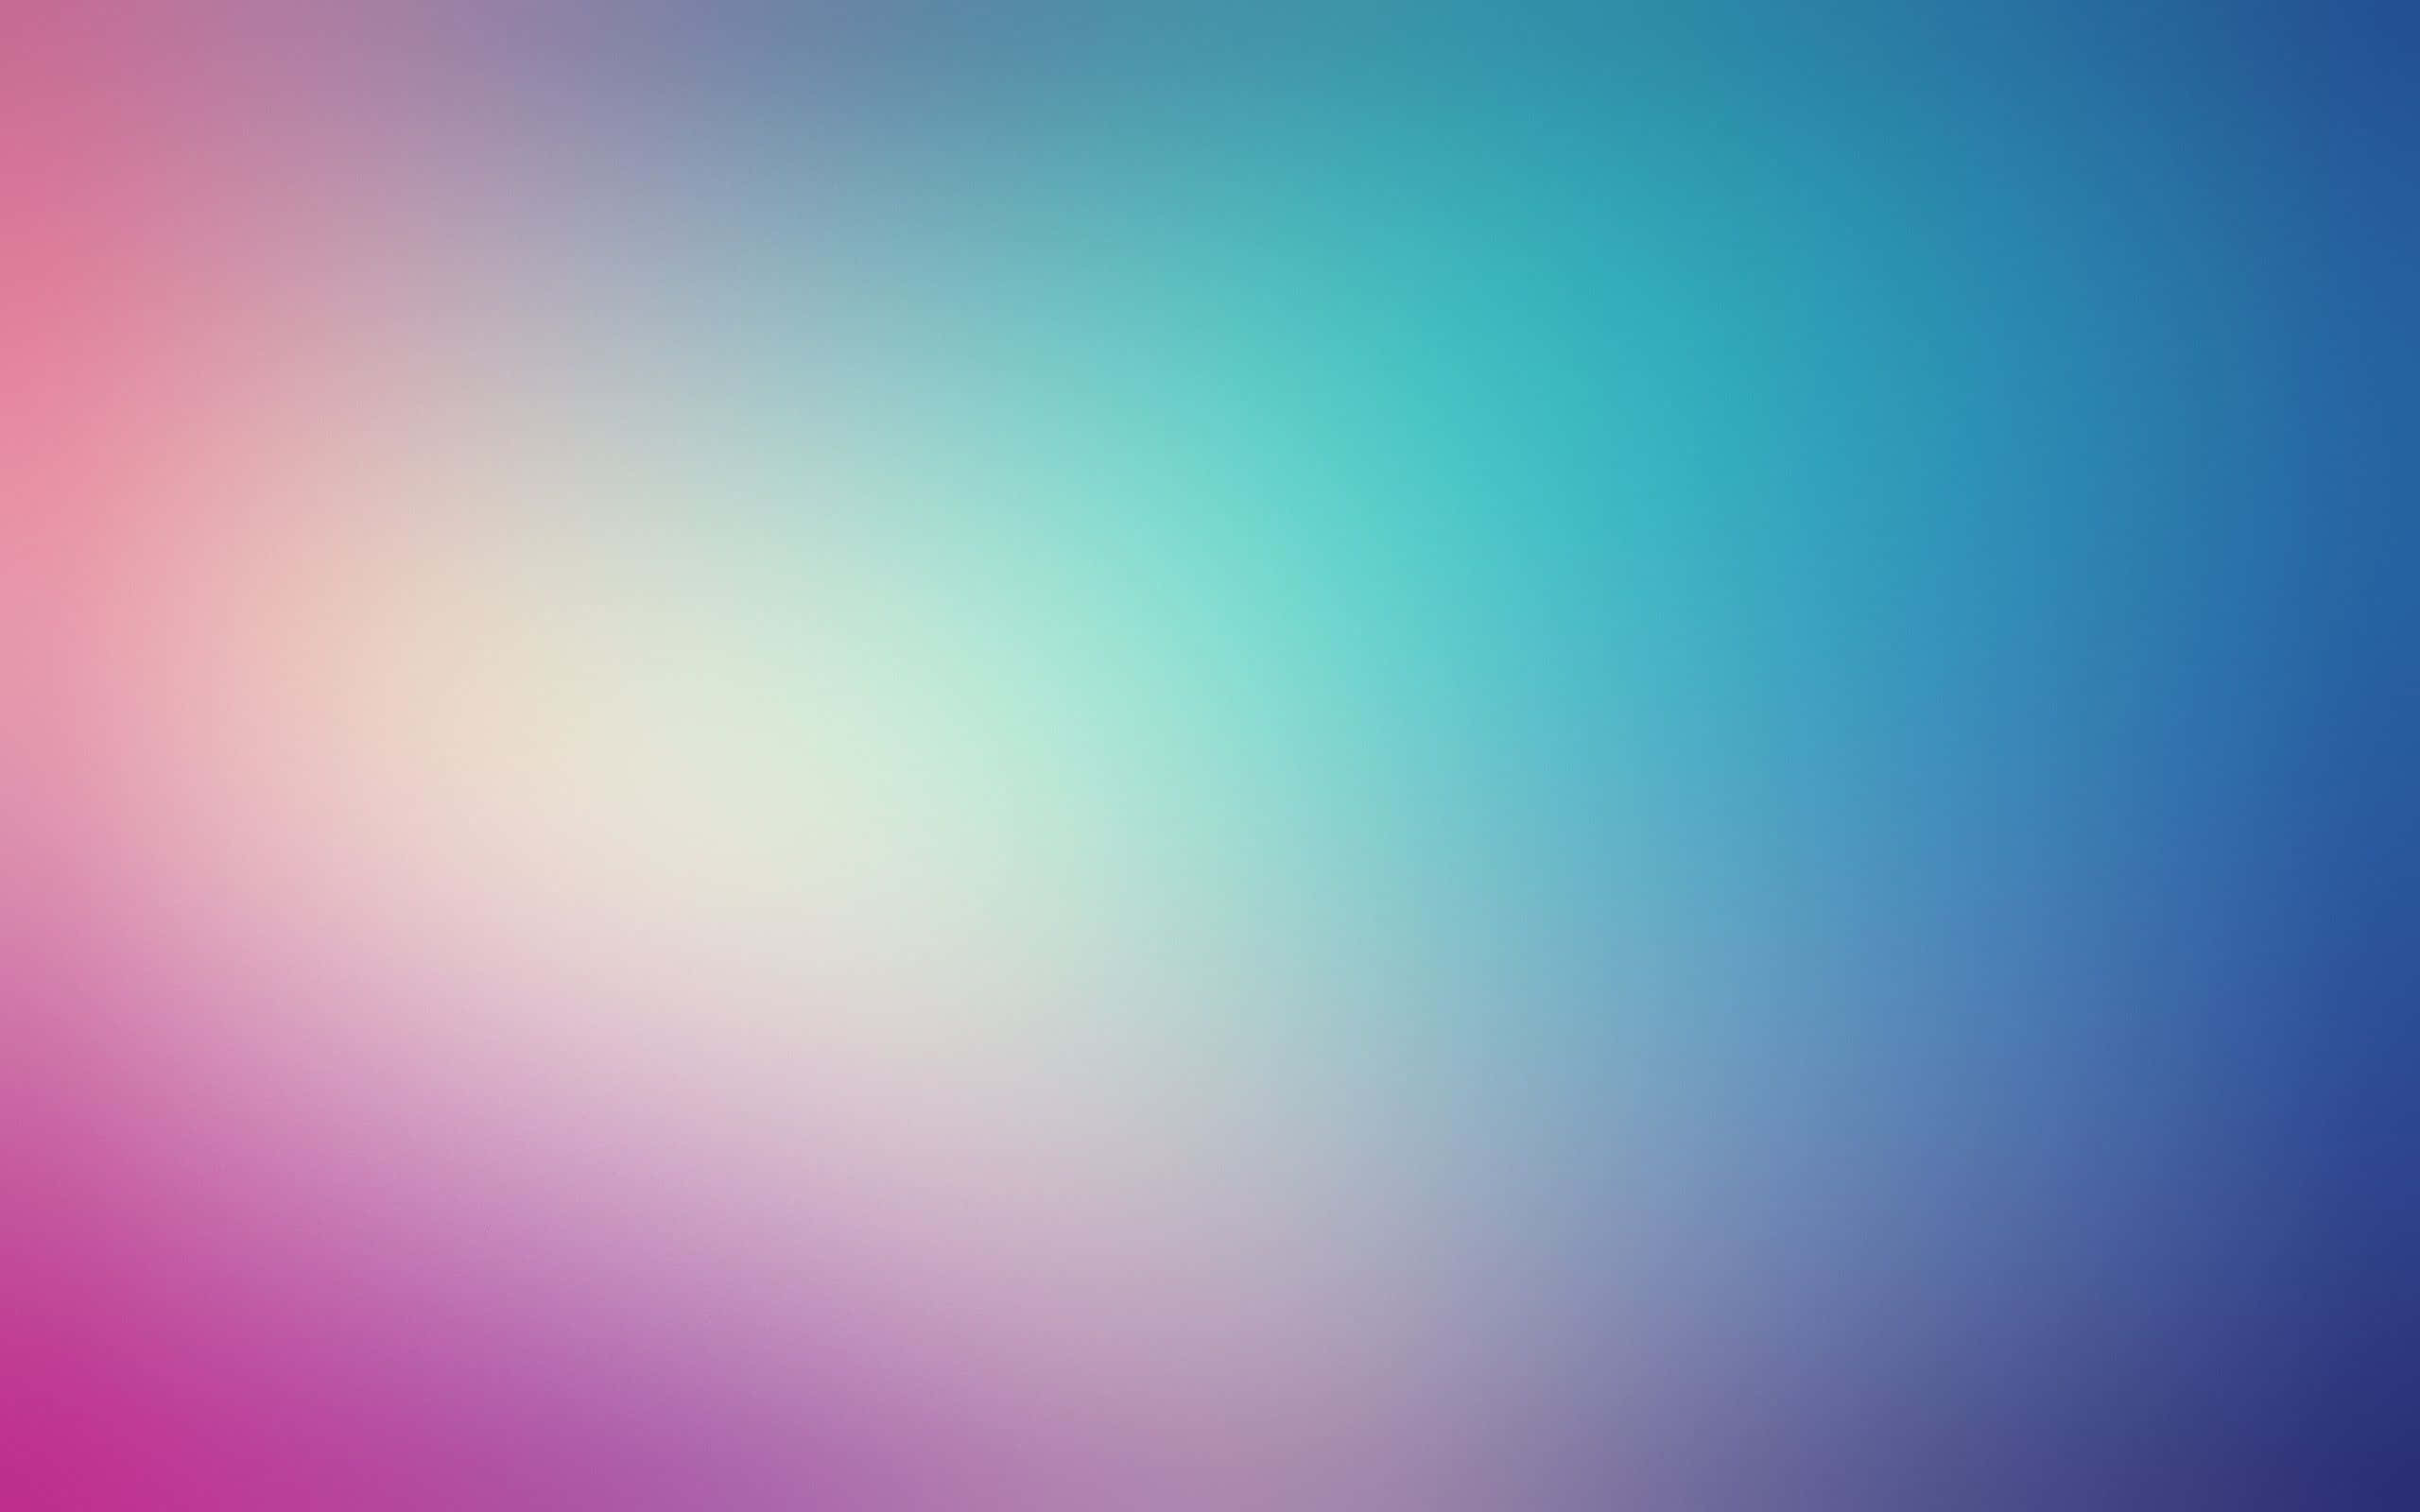 Mint Green And Purple Blurred Gradient Background